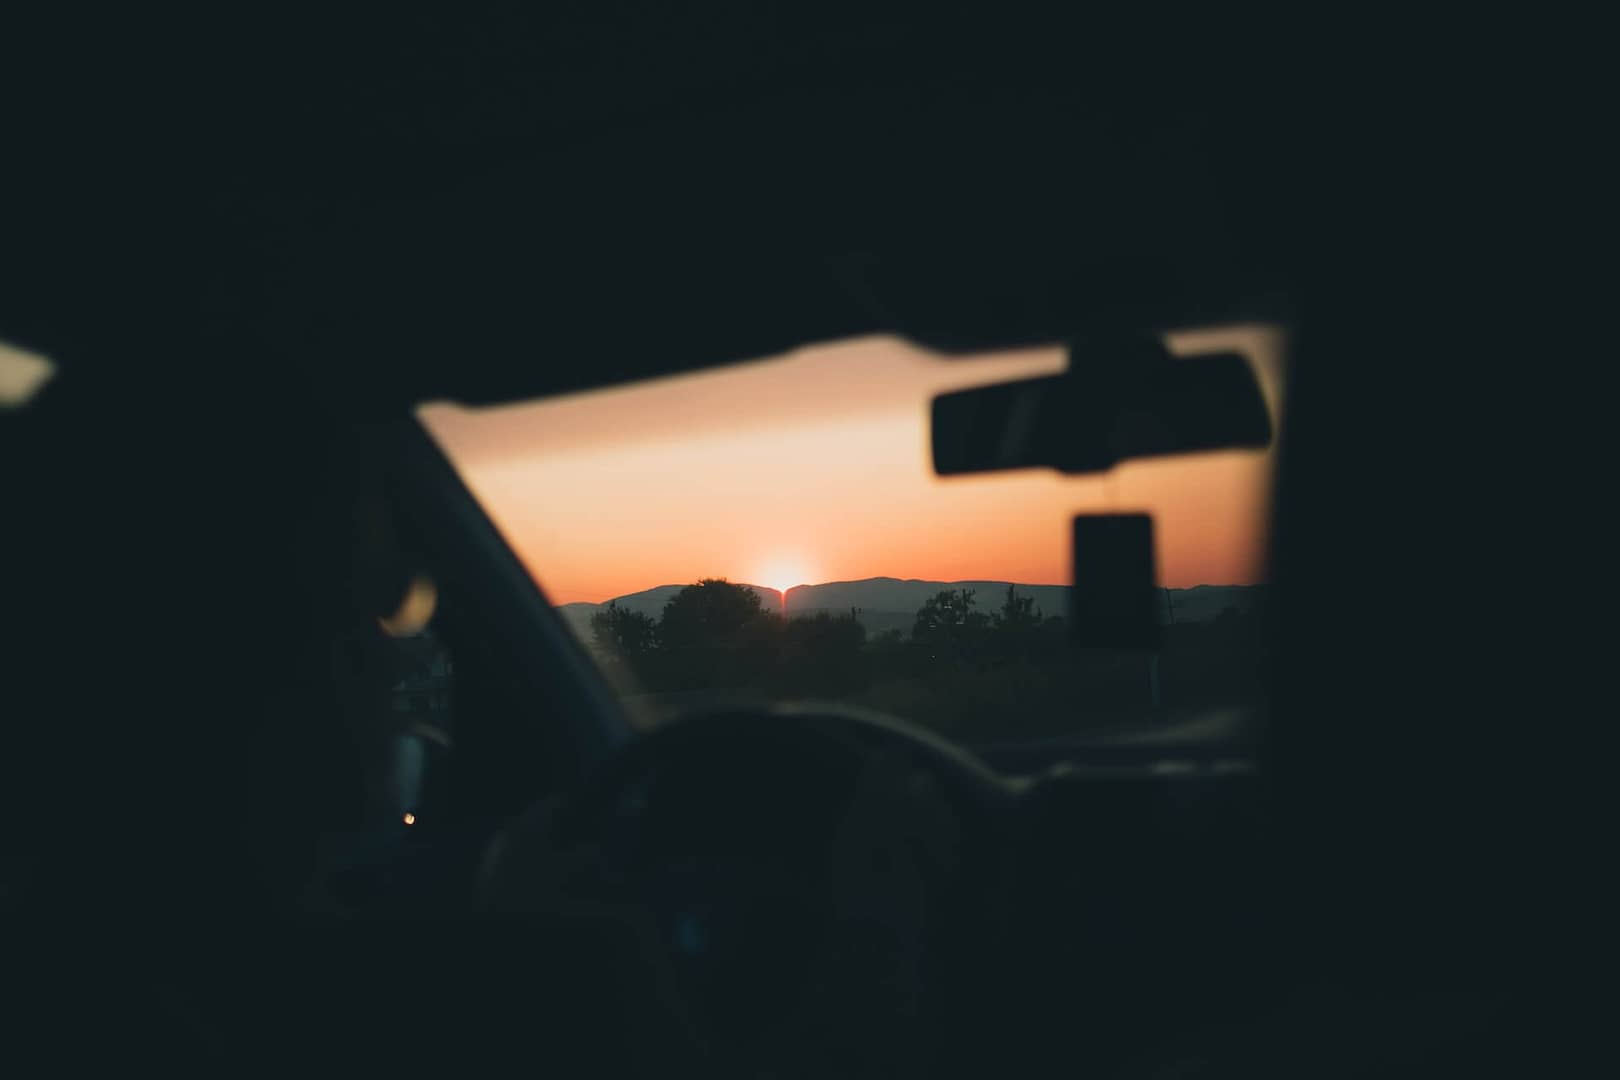 Sun setting from the perspective of the front of a car